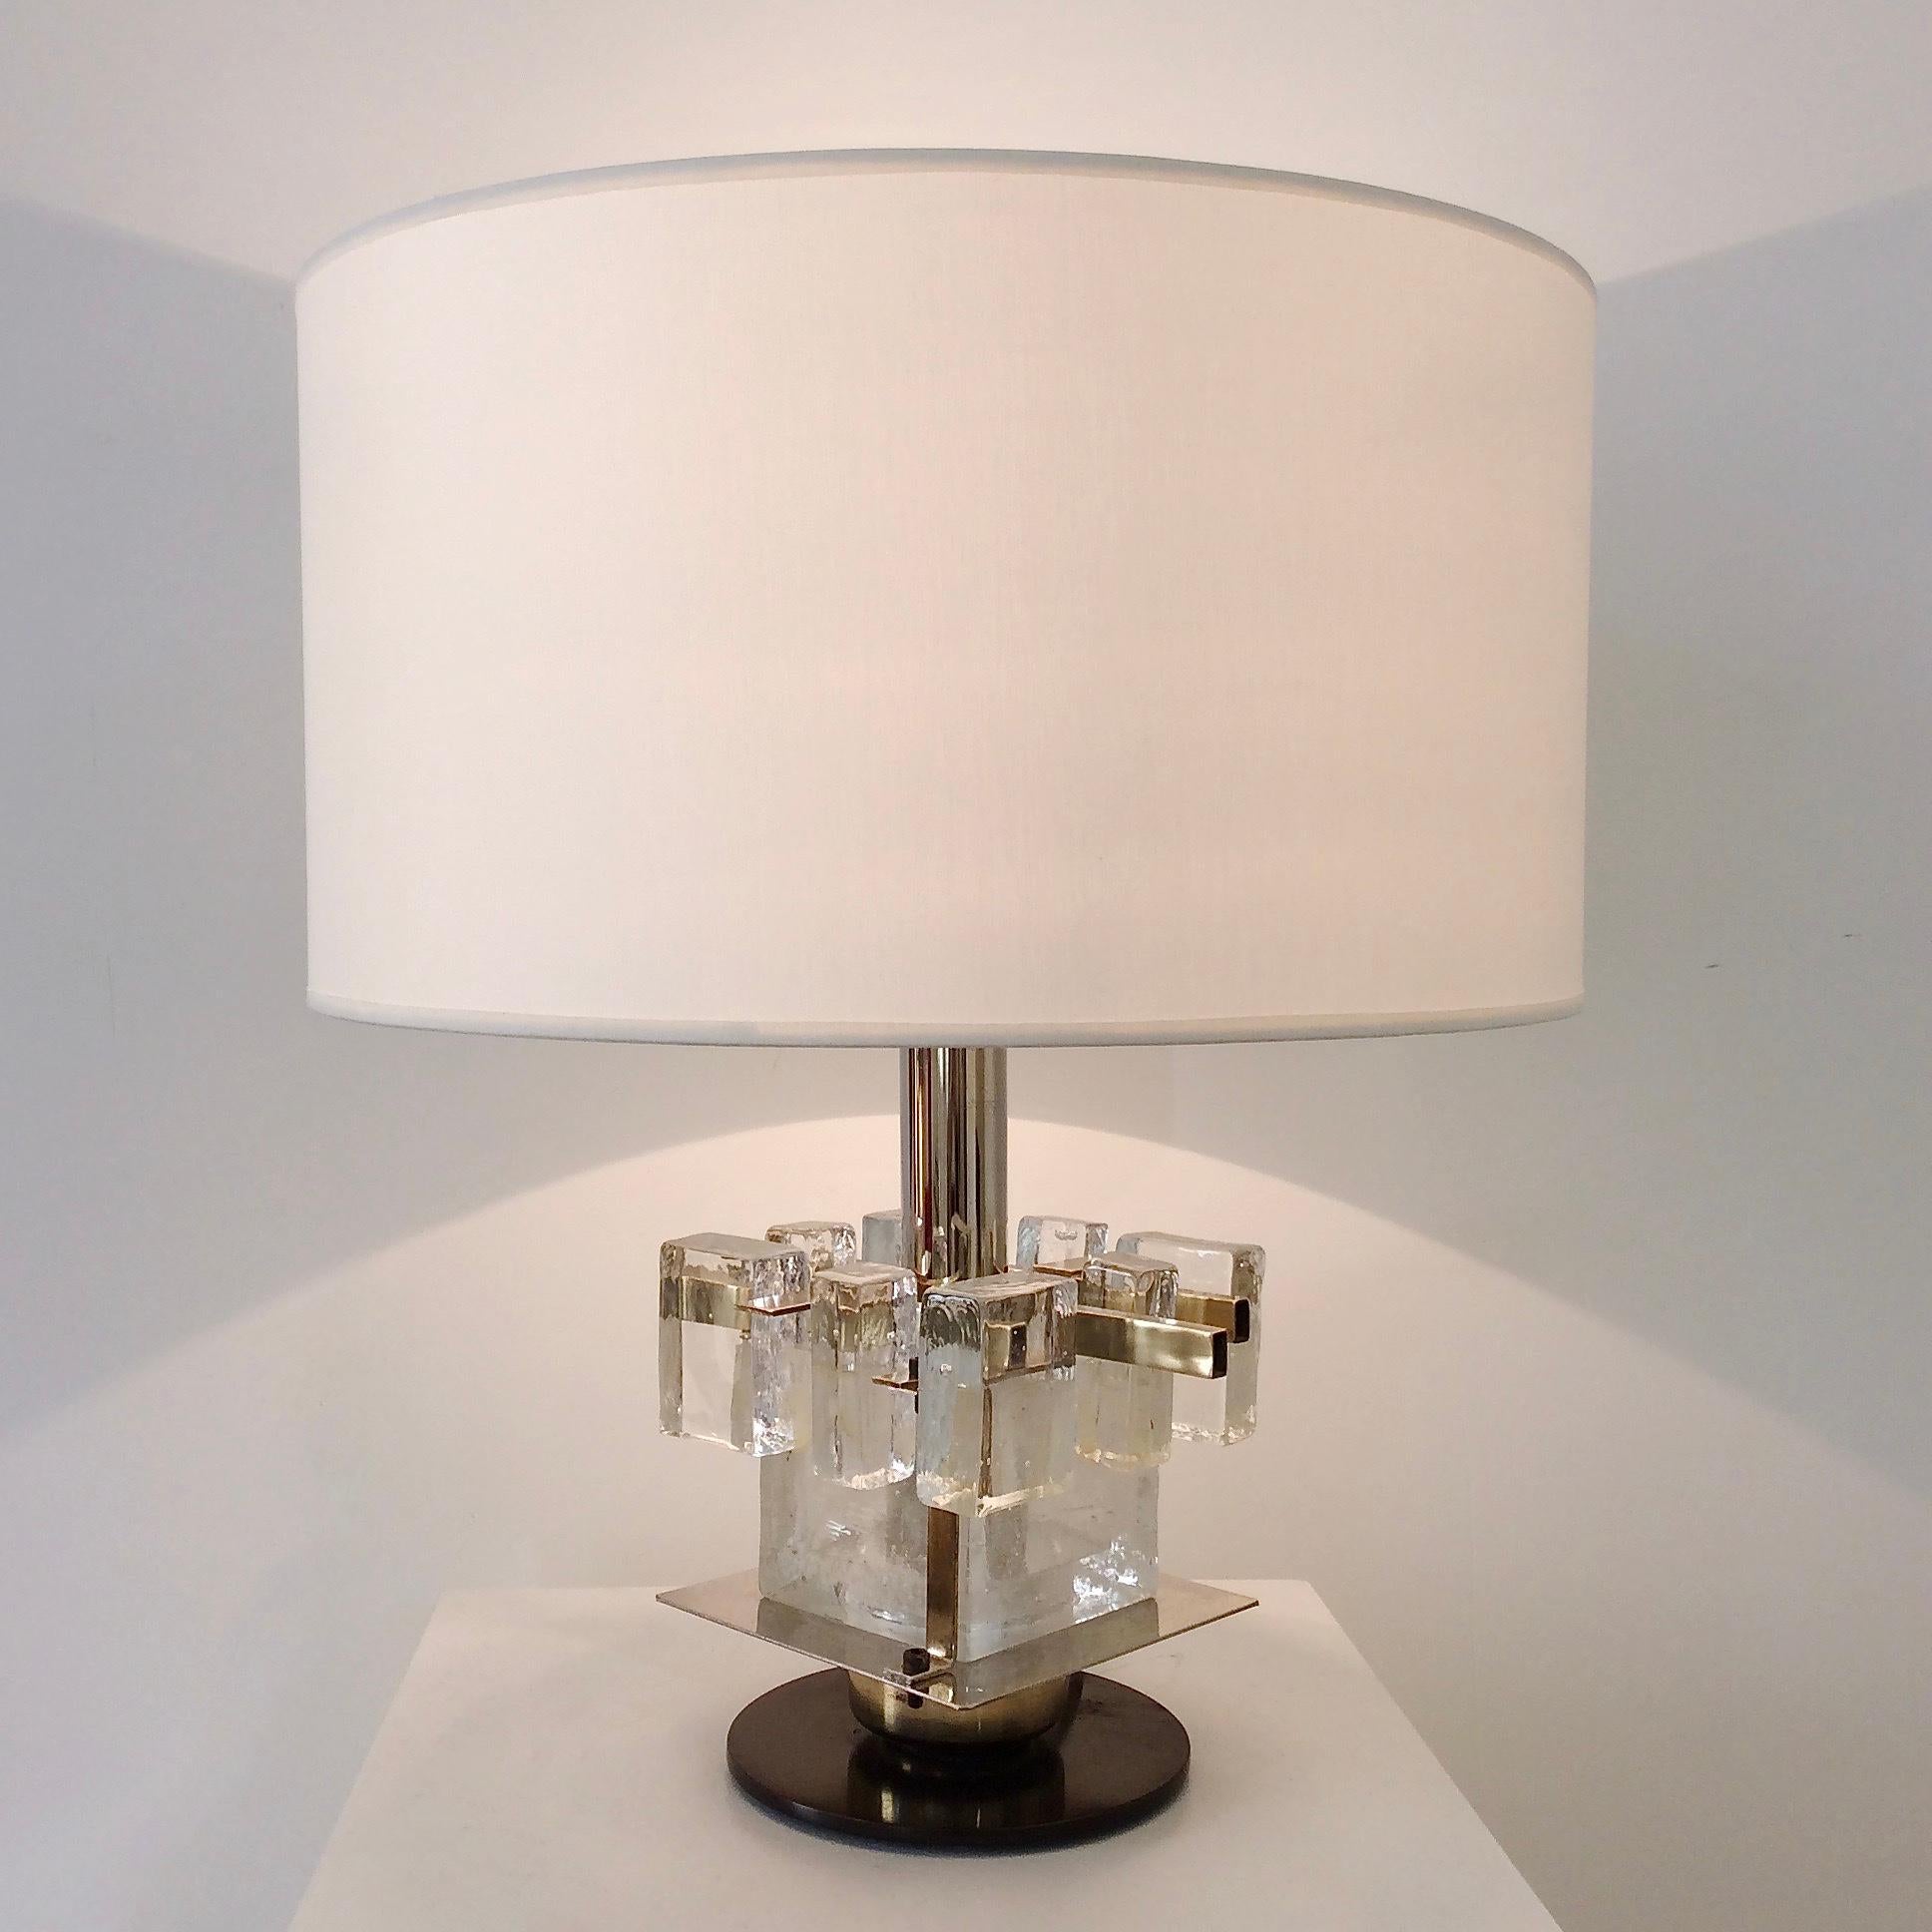 Murano glass table lamp, attributed to Poliarte, circa 1960, Italy.
Murano glass forms, brass, patinated metal, chromed steel, new fabric shade.
One E14 bulb
Dimensions: Total height: 40 cm, diameter of the shade: 34 cm.
All purchases are covered by